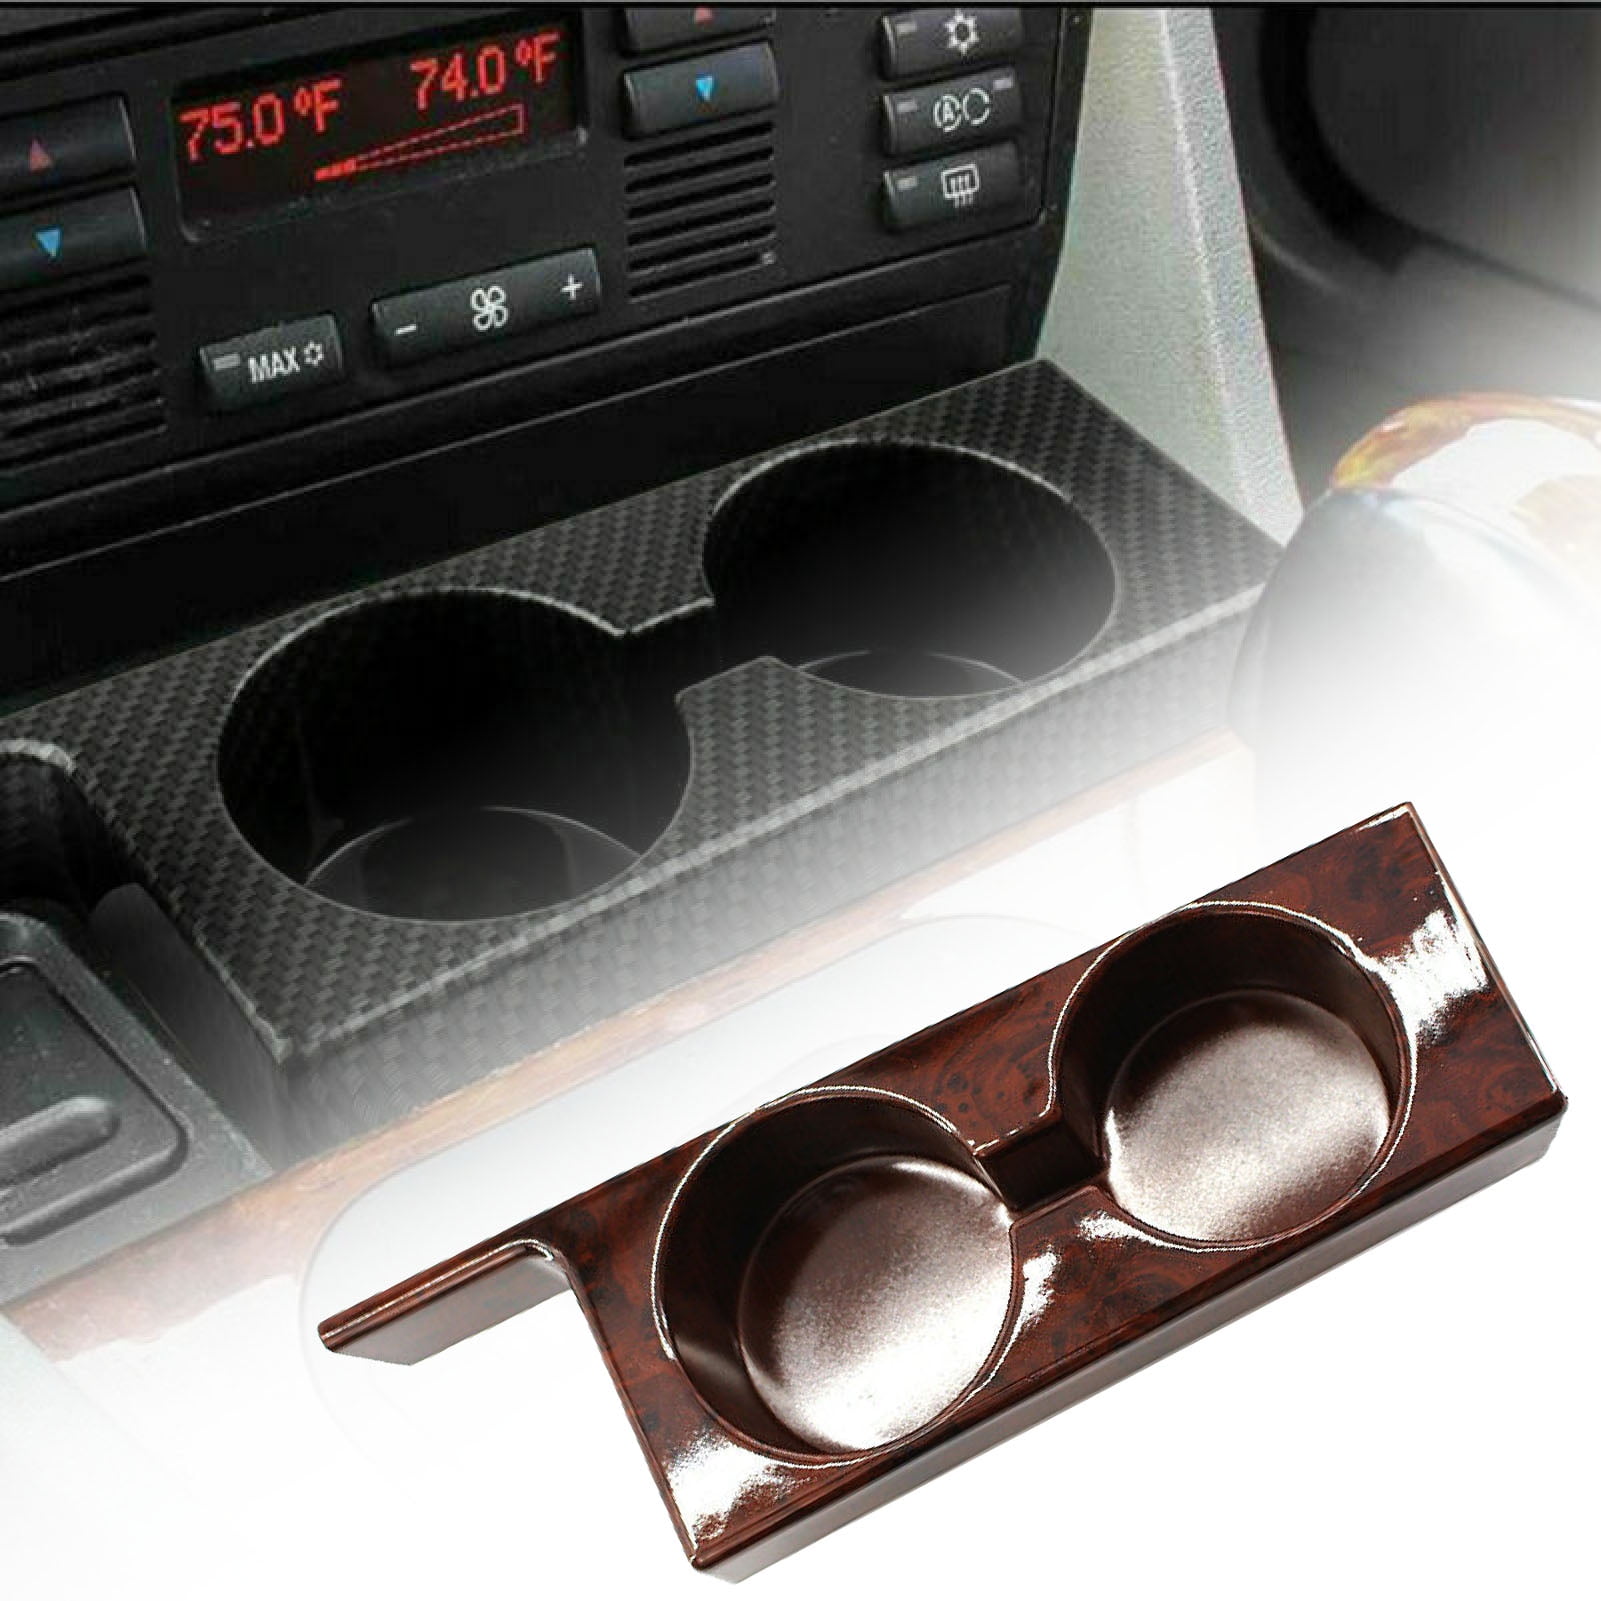 BMW 5 series E39 Cup Holder - Can be wrapped in carbon fibre